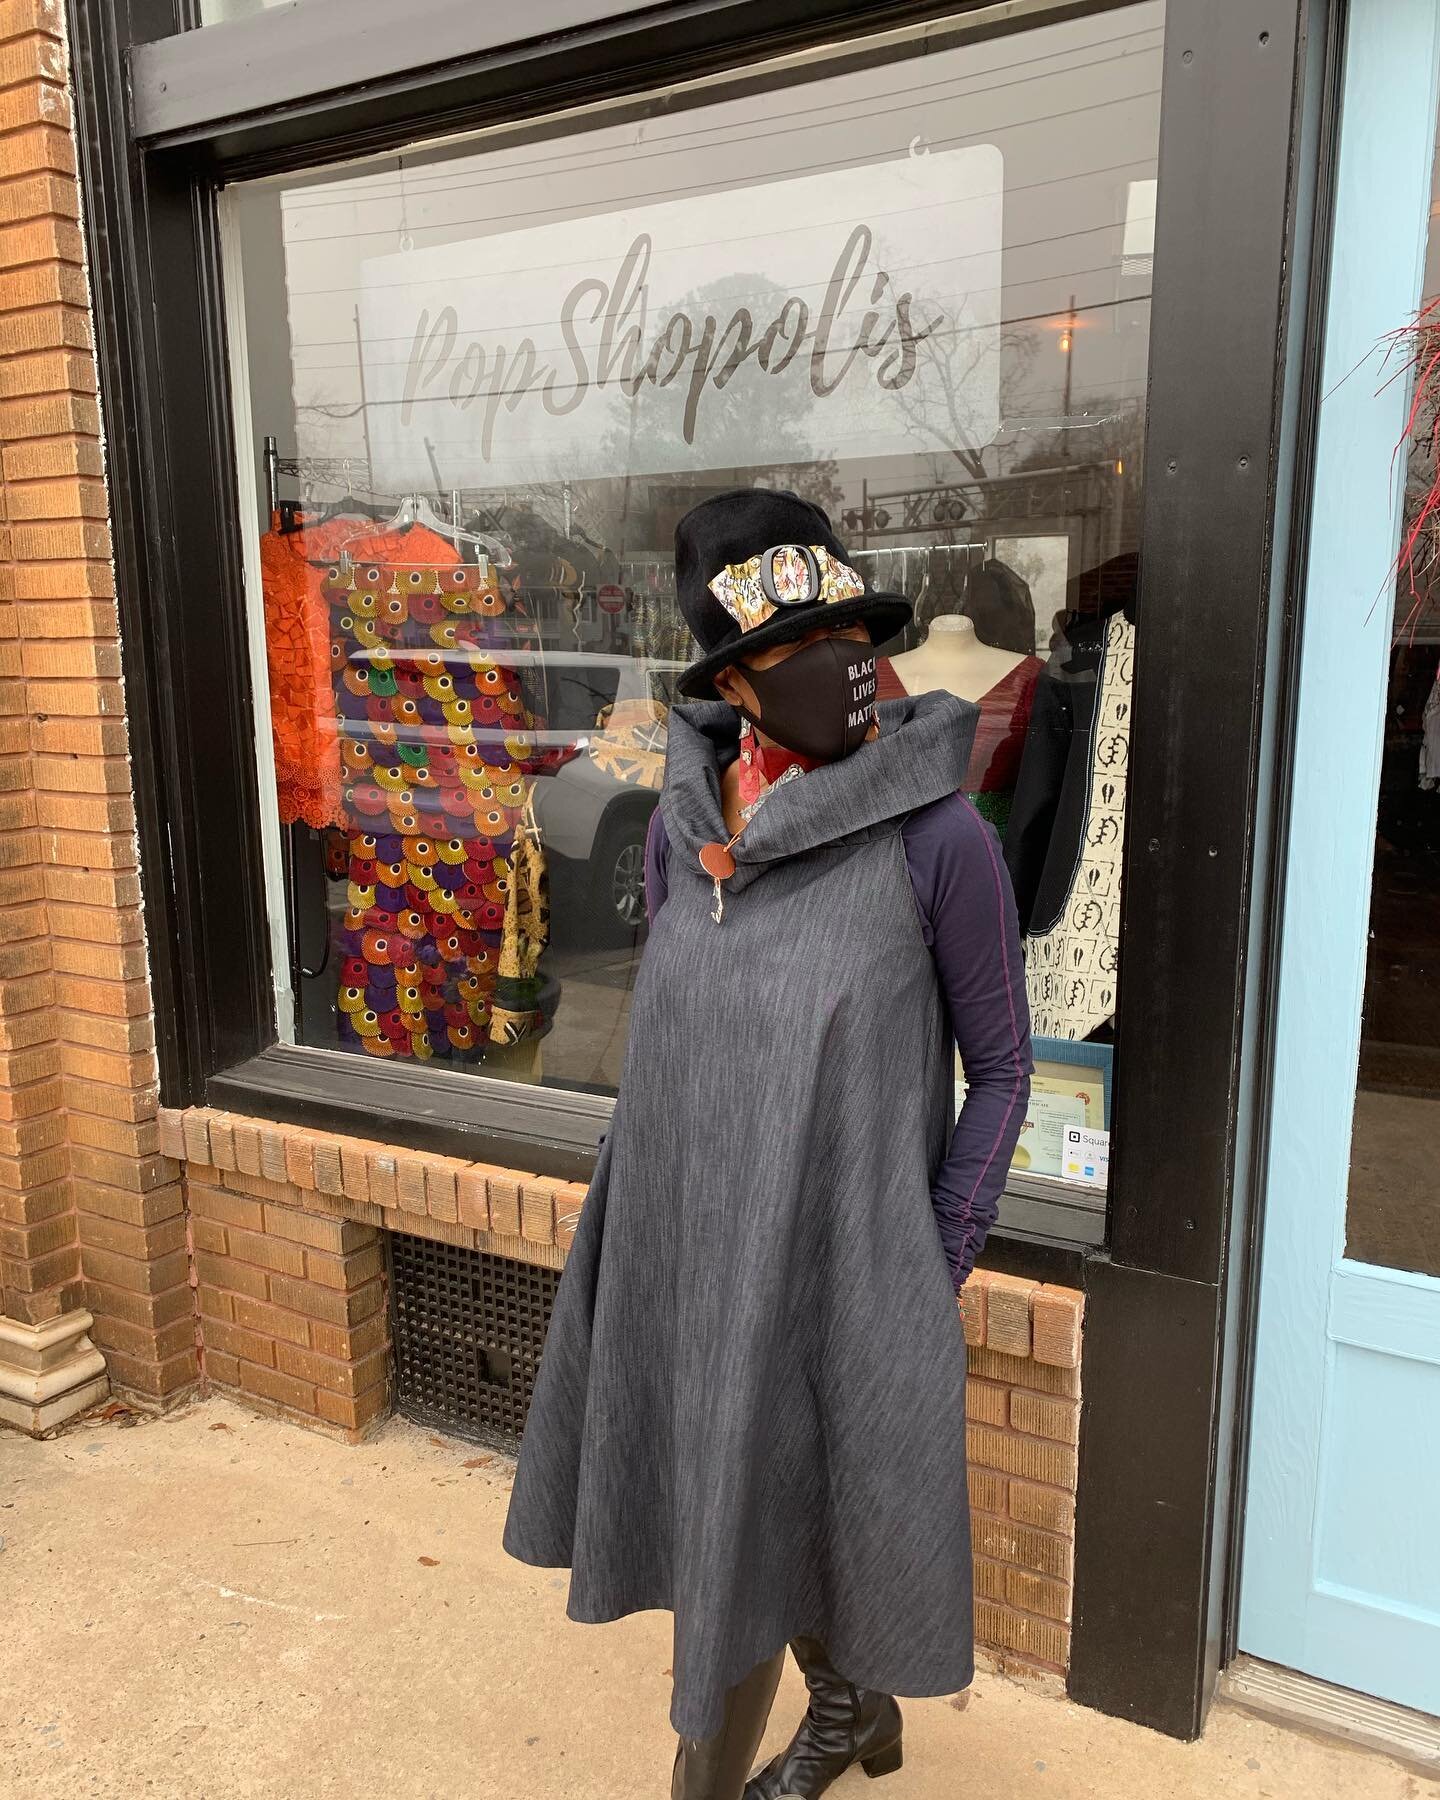 You still have time to head on over  and purchase some amazing one of a kind items. Beat me there! #fashion #popshopolisatl #collegepark #popupshop #blackhistorymonth #shopblack #supportblackownedbusinesses